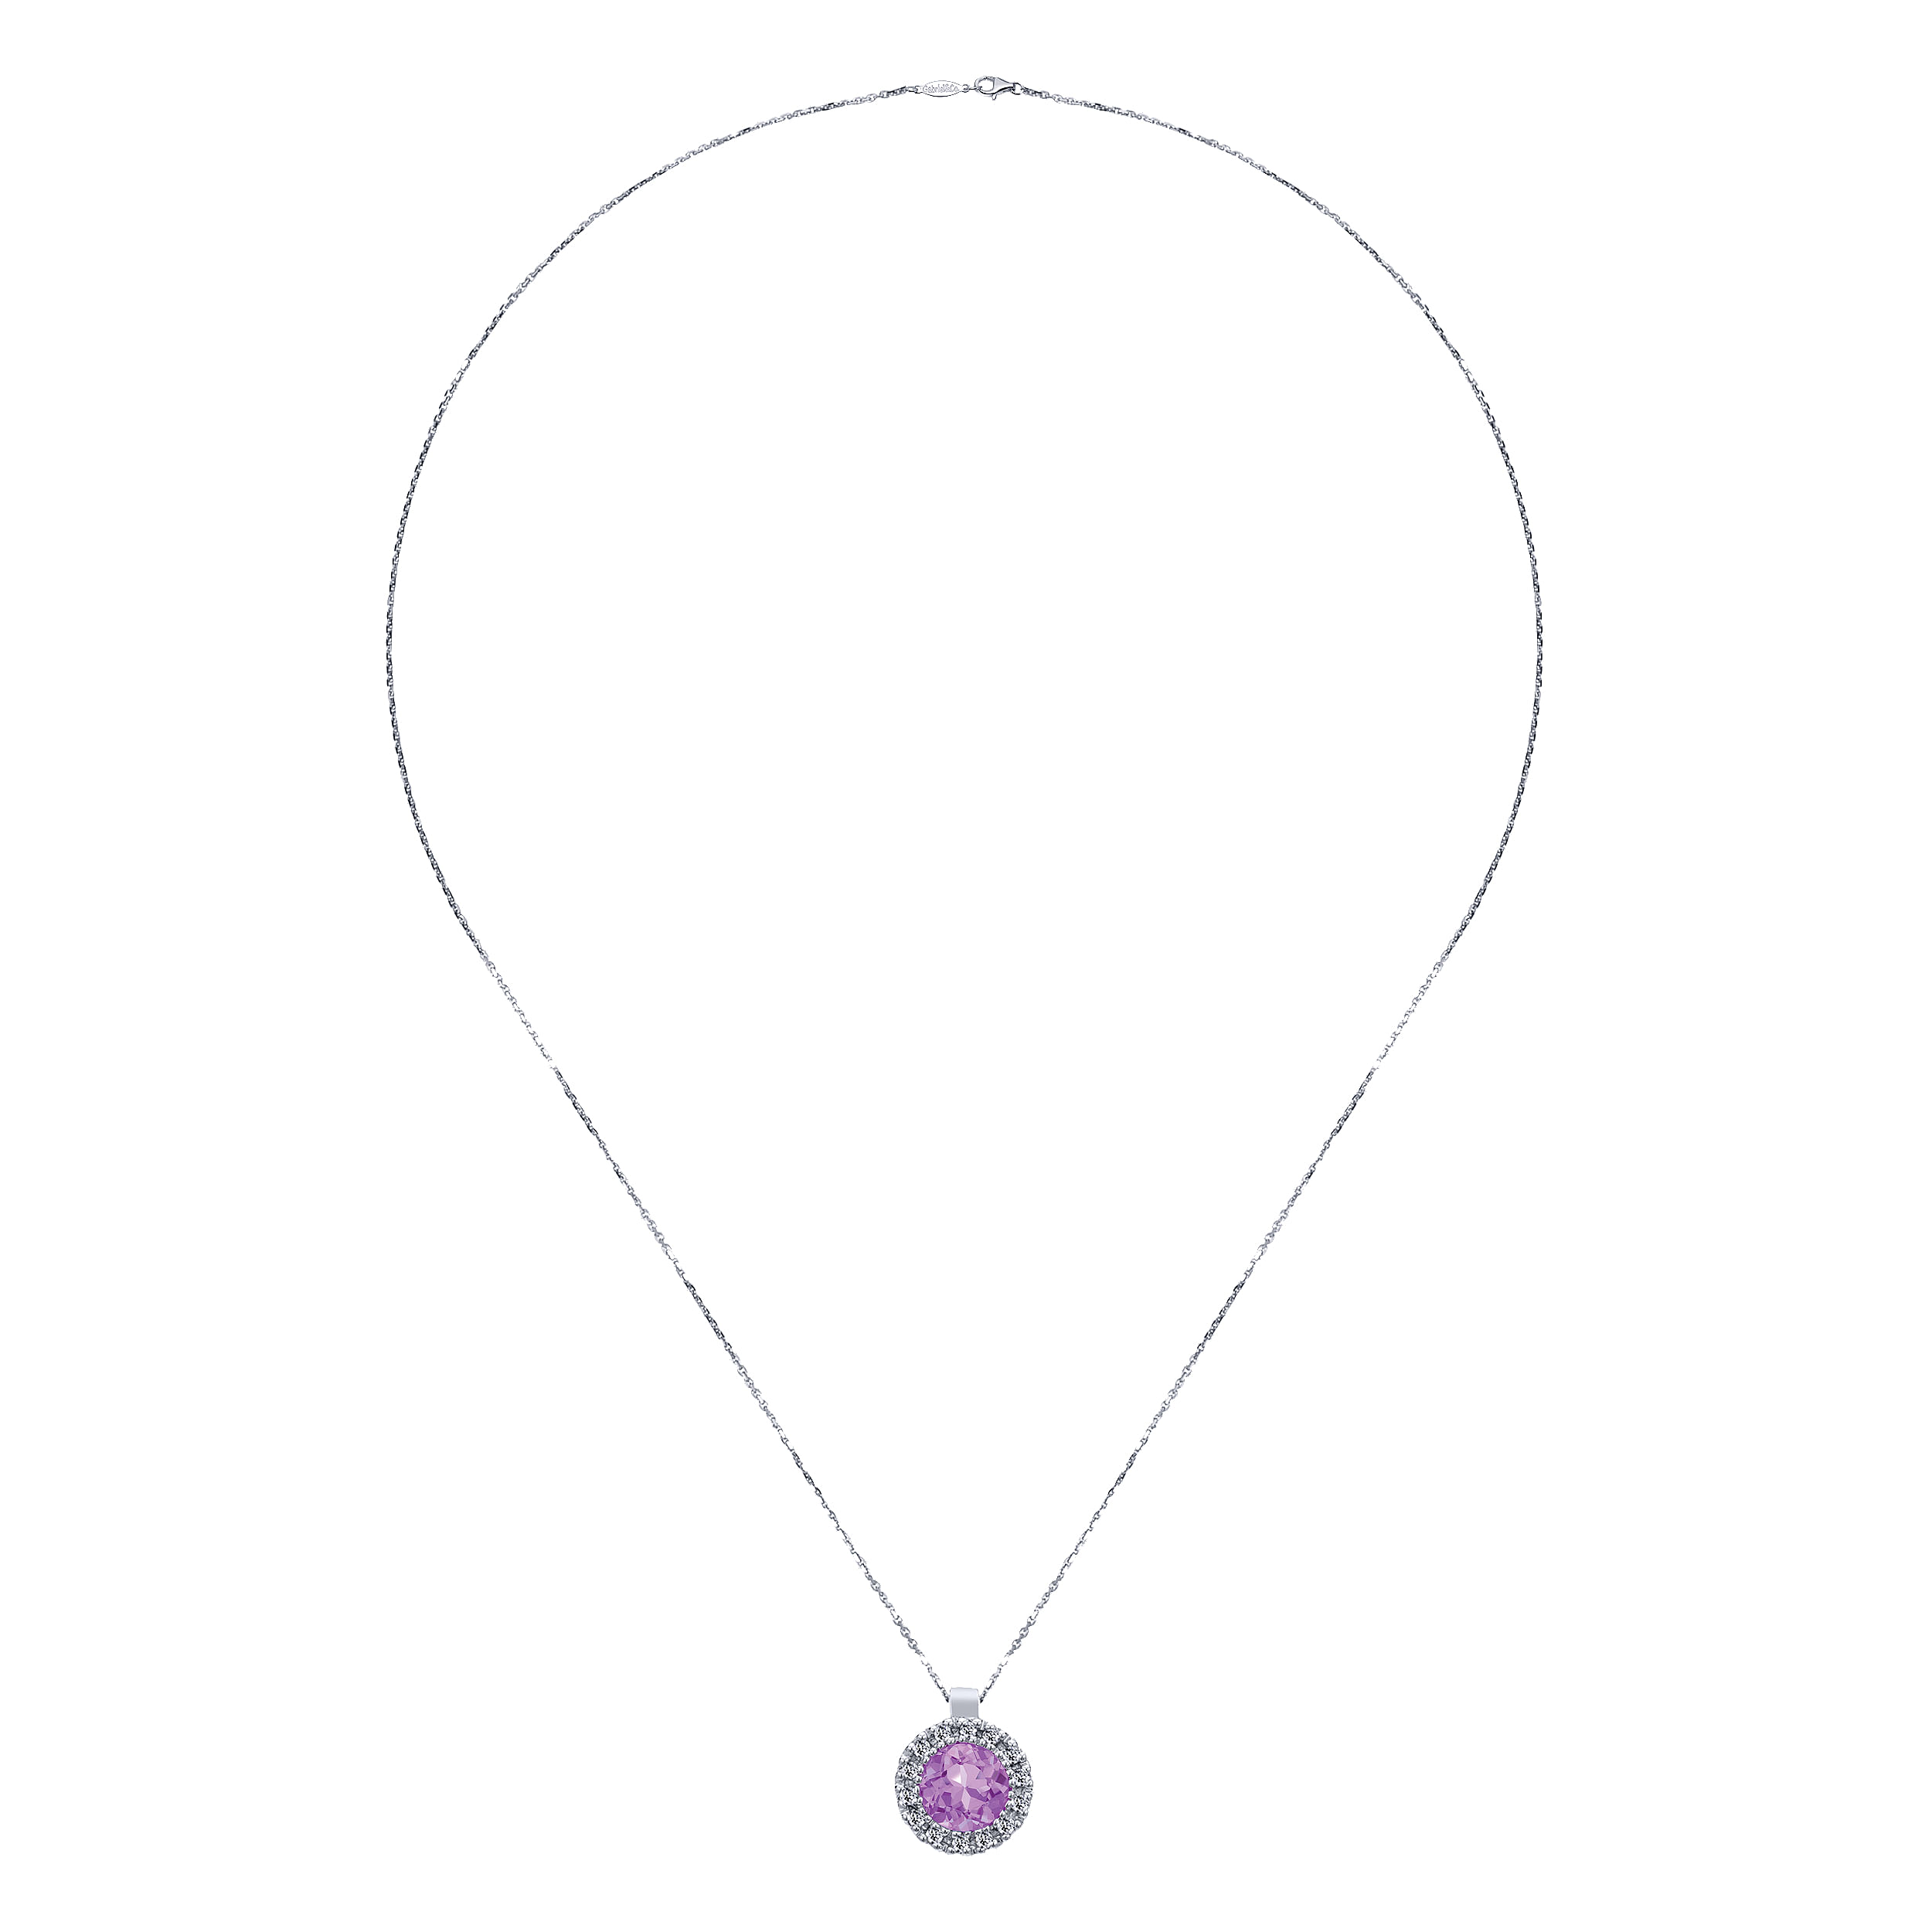 18 inch 14K White Gold Round Amethyst and Diamond Pendant Necklace